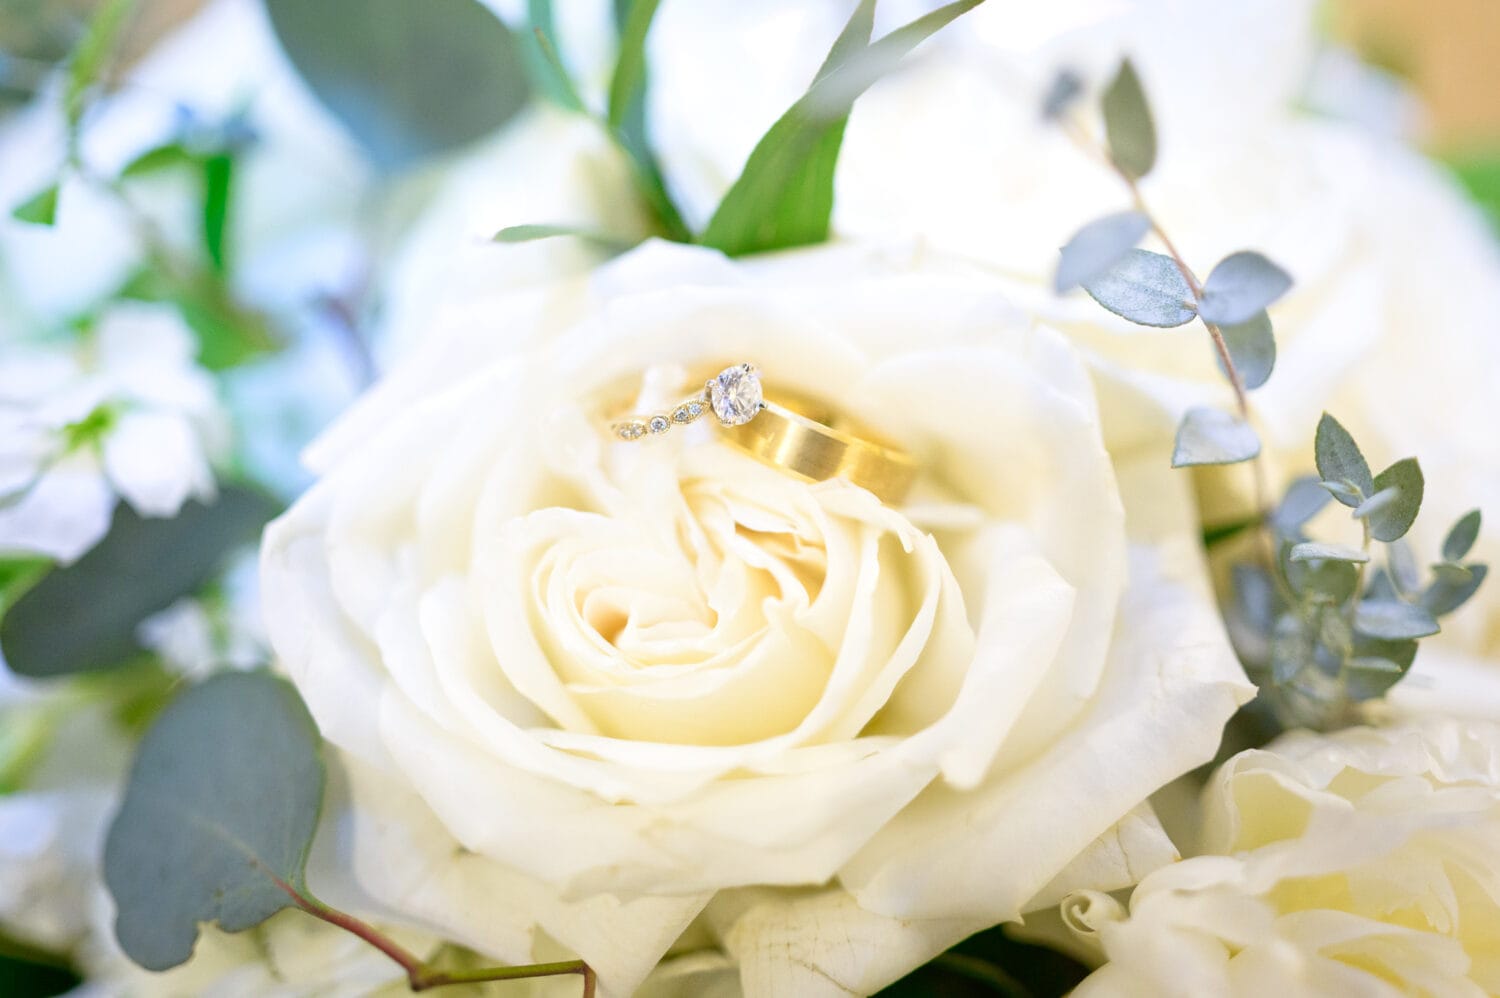 Rings on the flowers - Pawleys Plantation Golf & Country Club